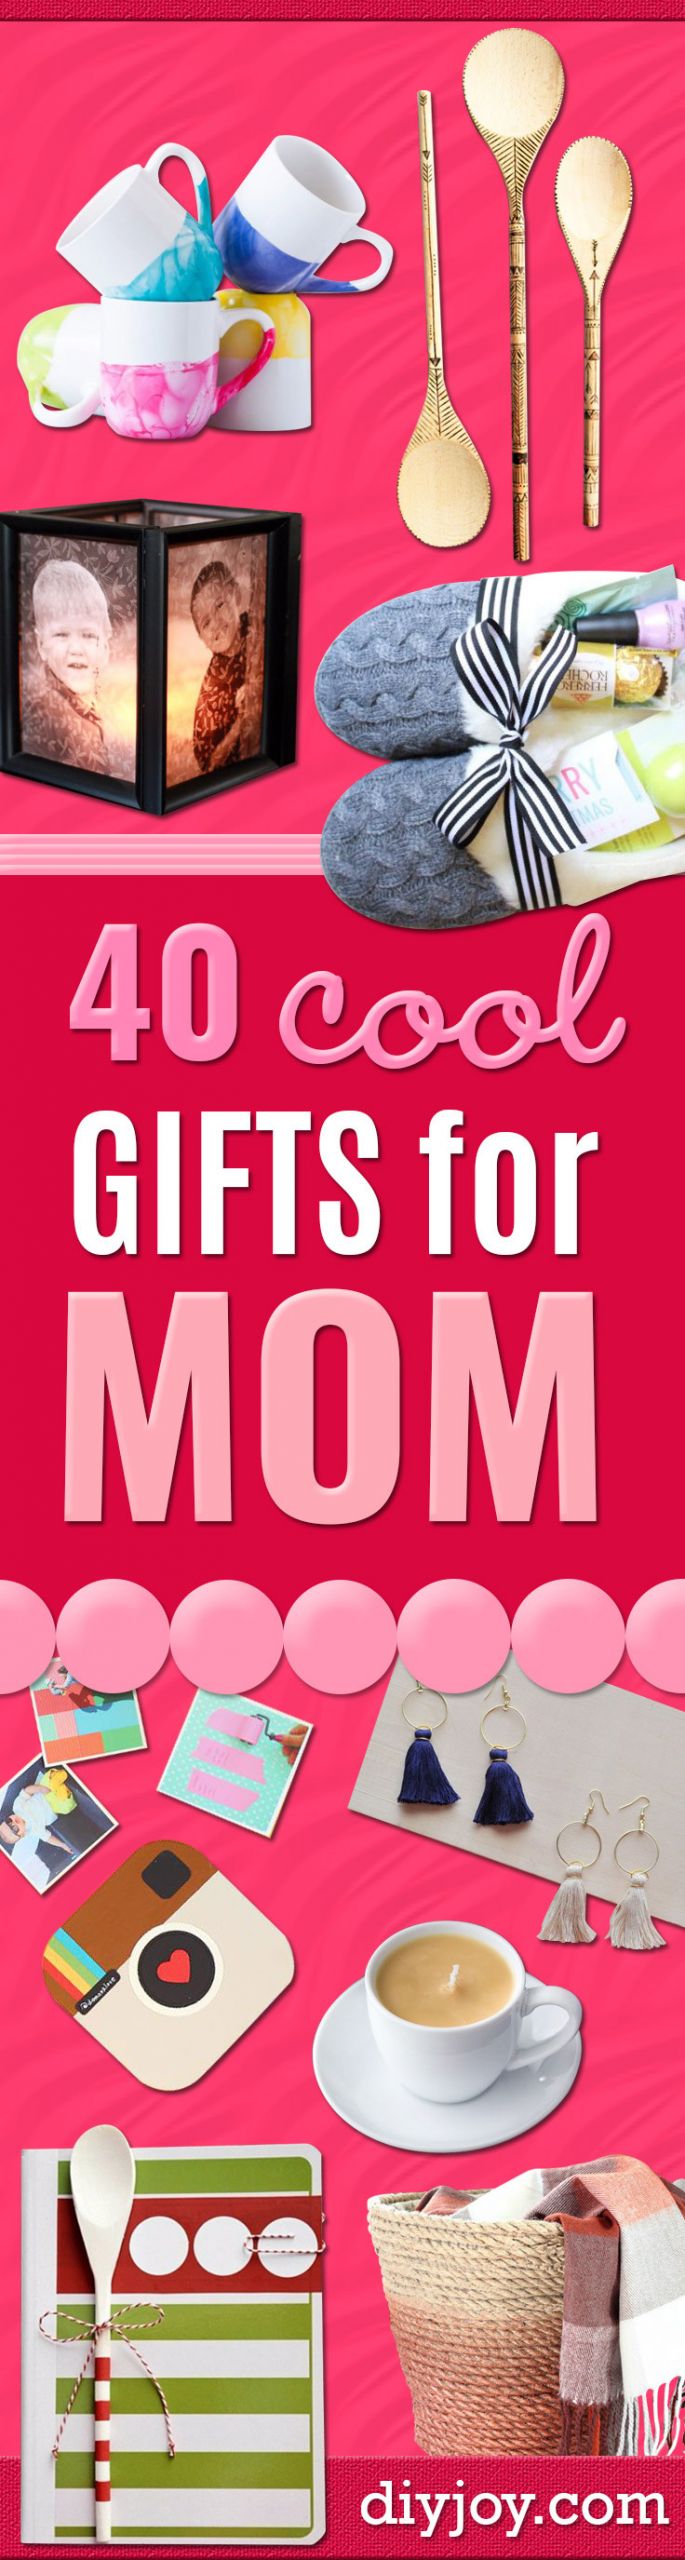 Holiday Gift Ideas For Mom
 40 Coolest Gifts To Make for Mom